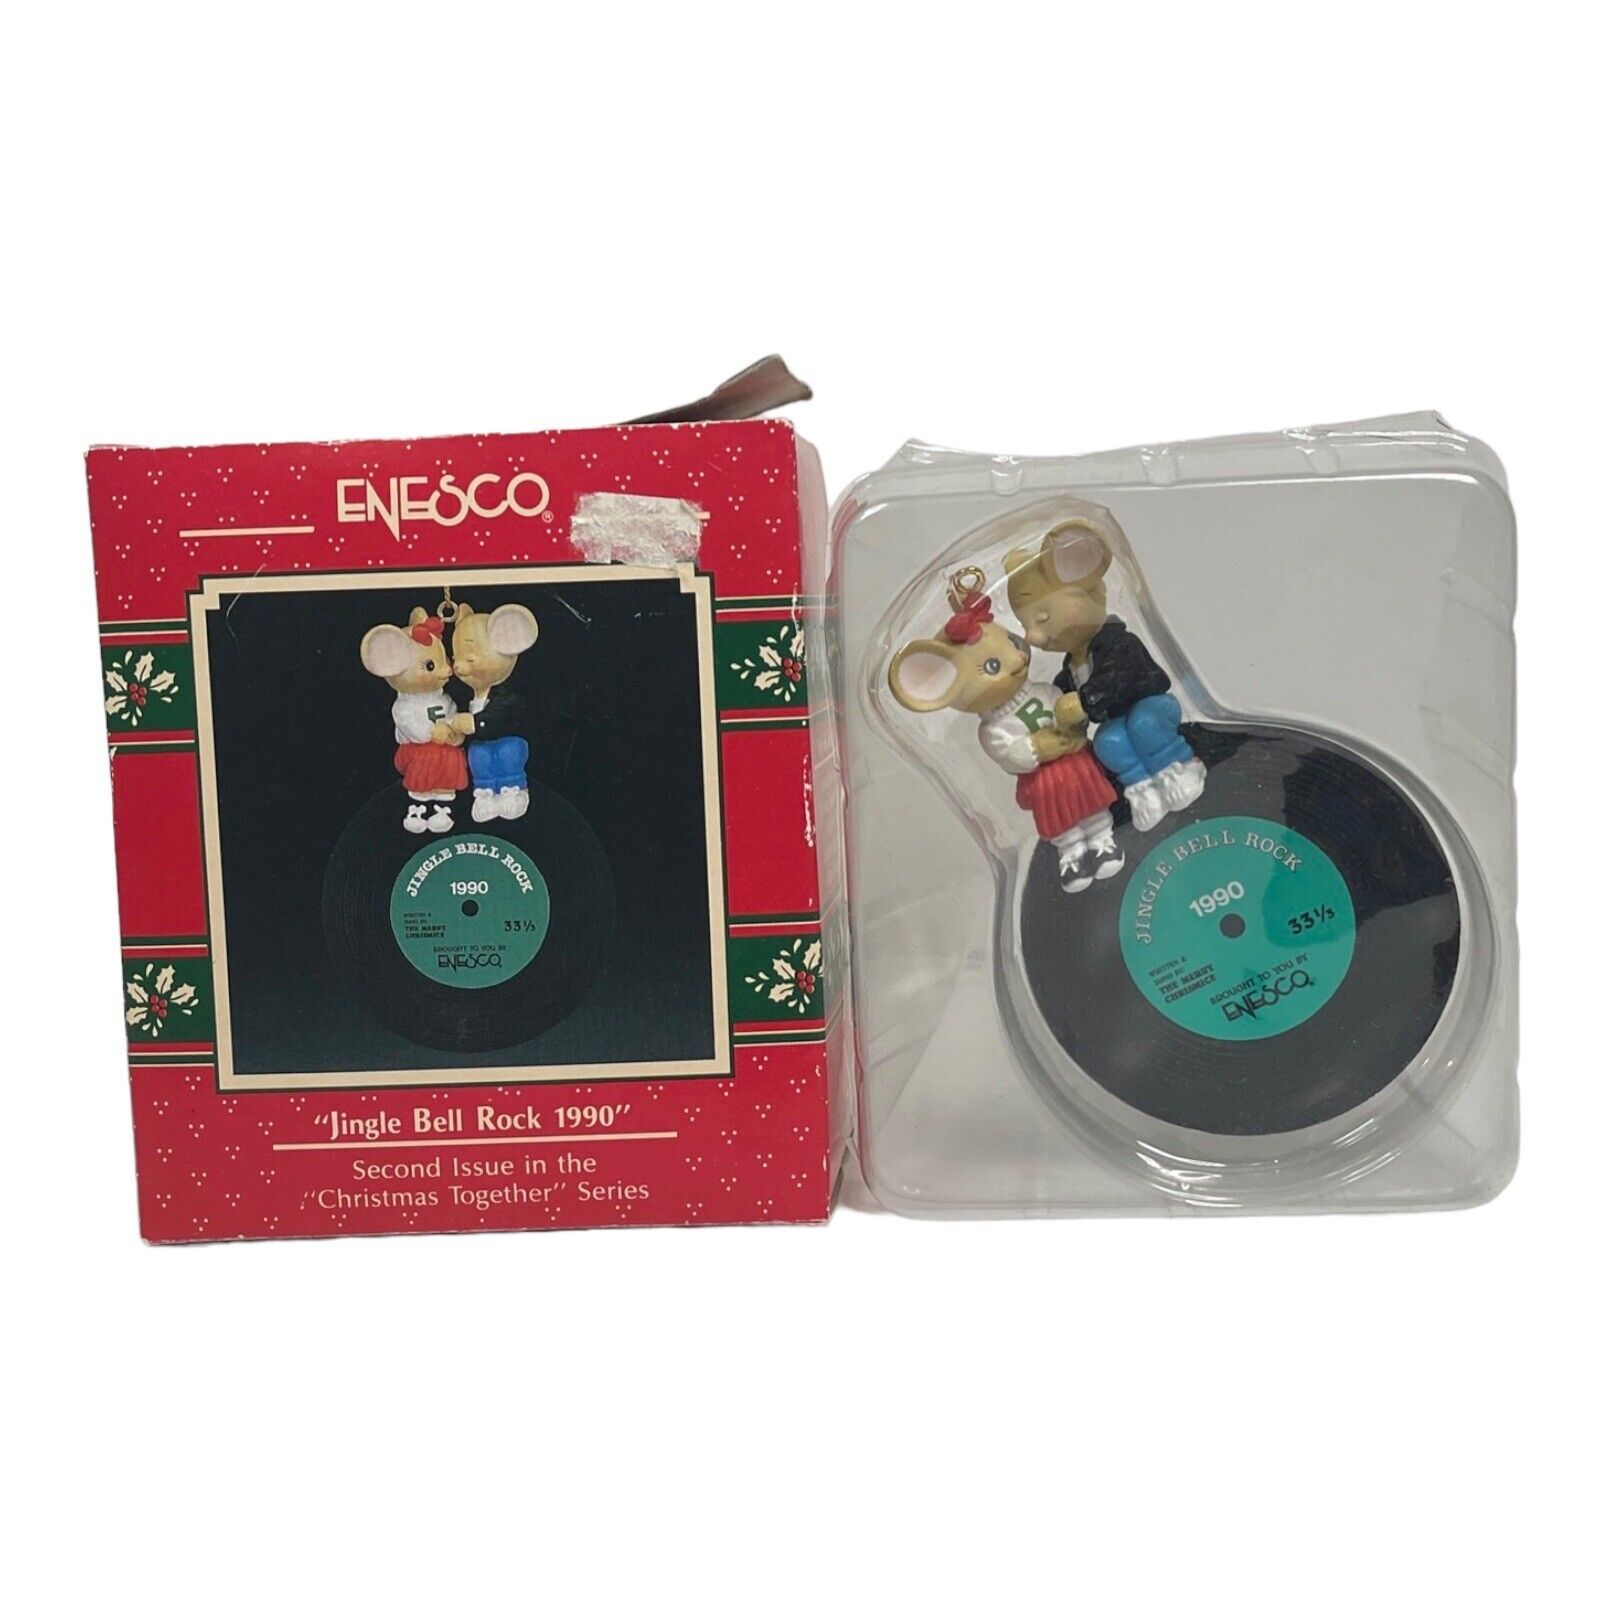 1990 Enesco Jingle Bell Rock 1990 2nd In The Christmas Together Series - NIB - $9.28